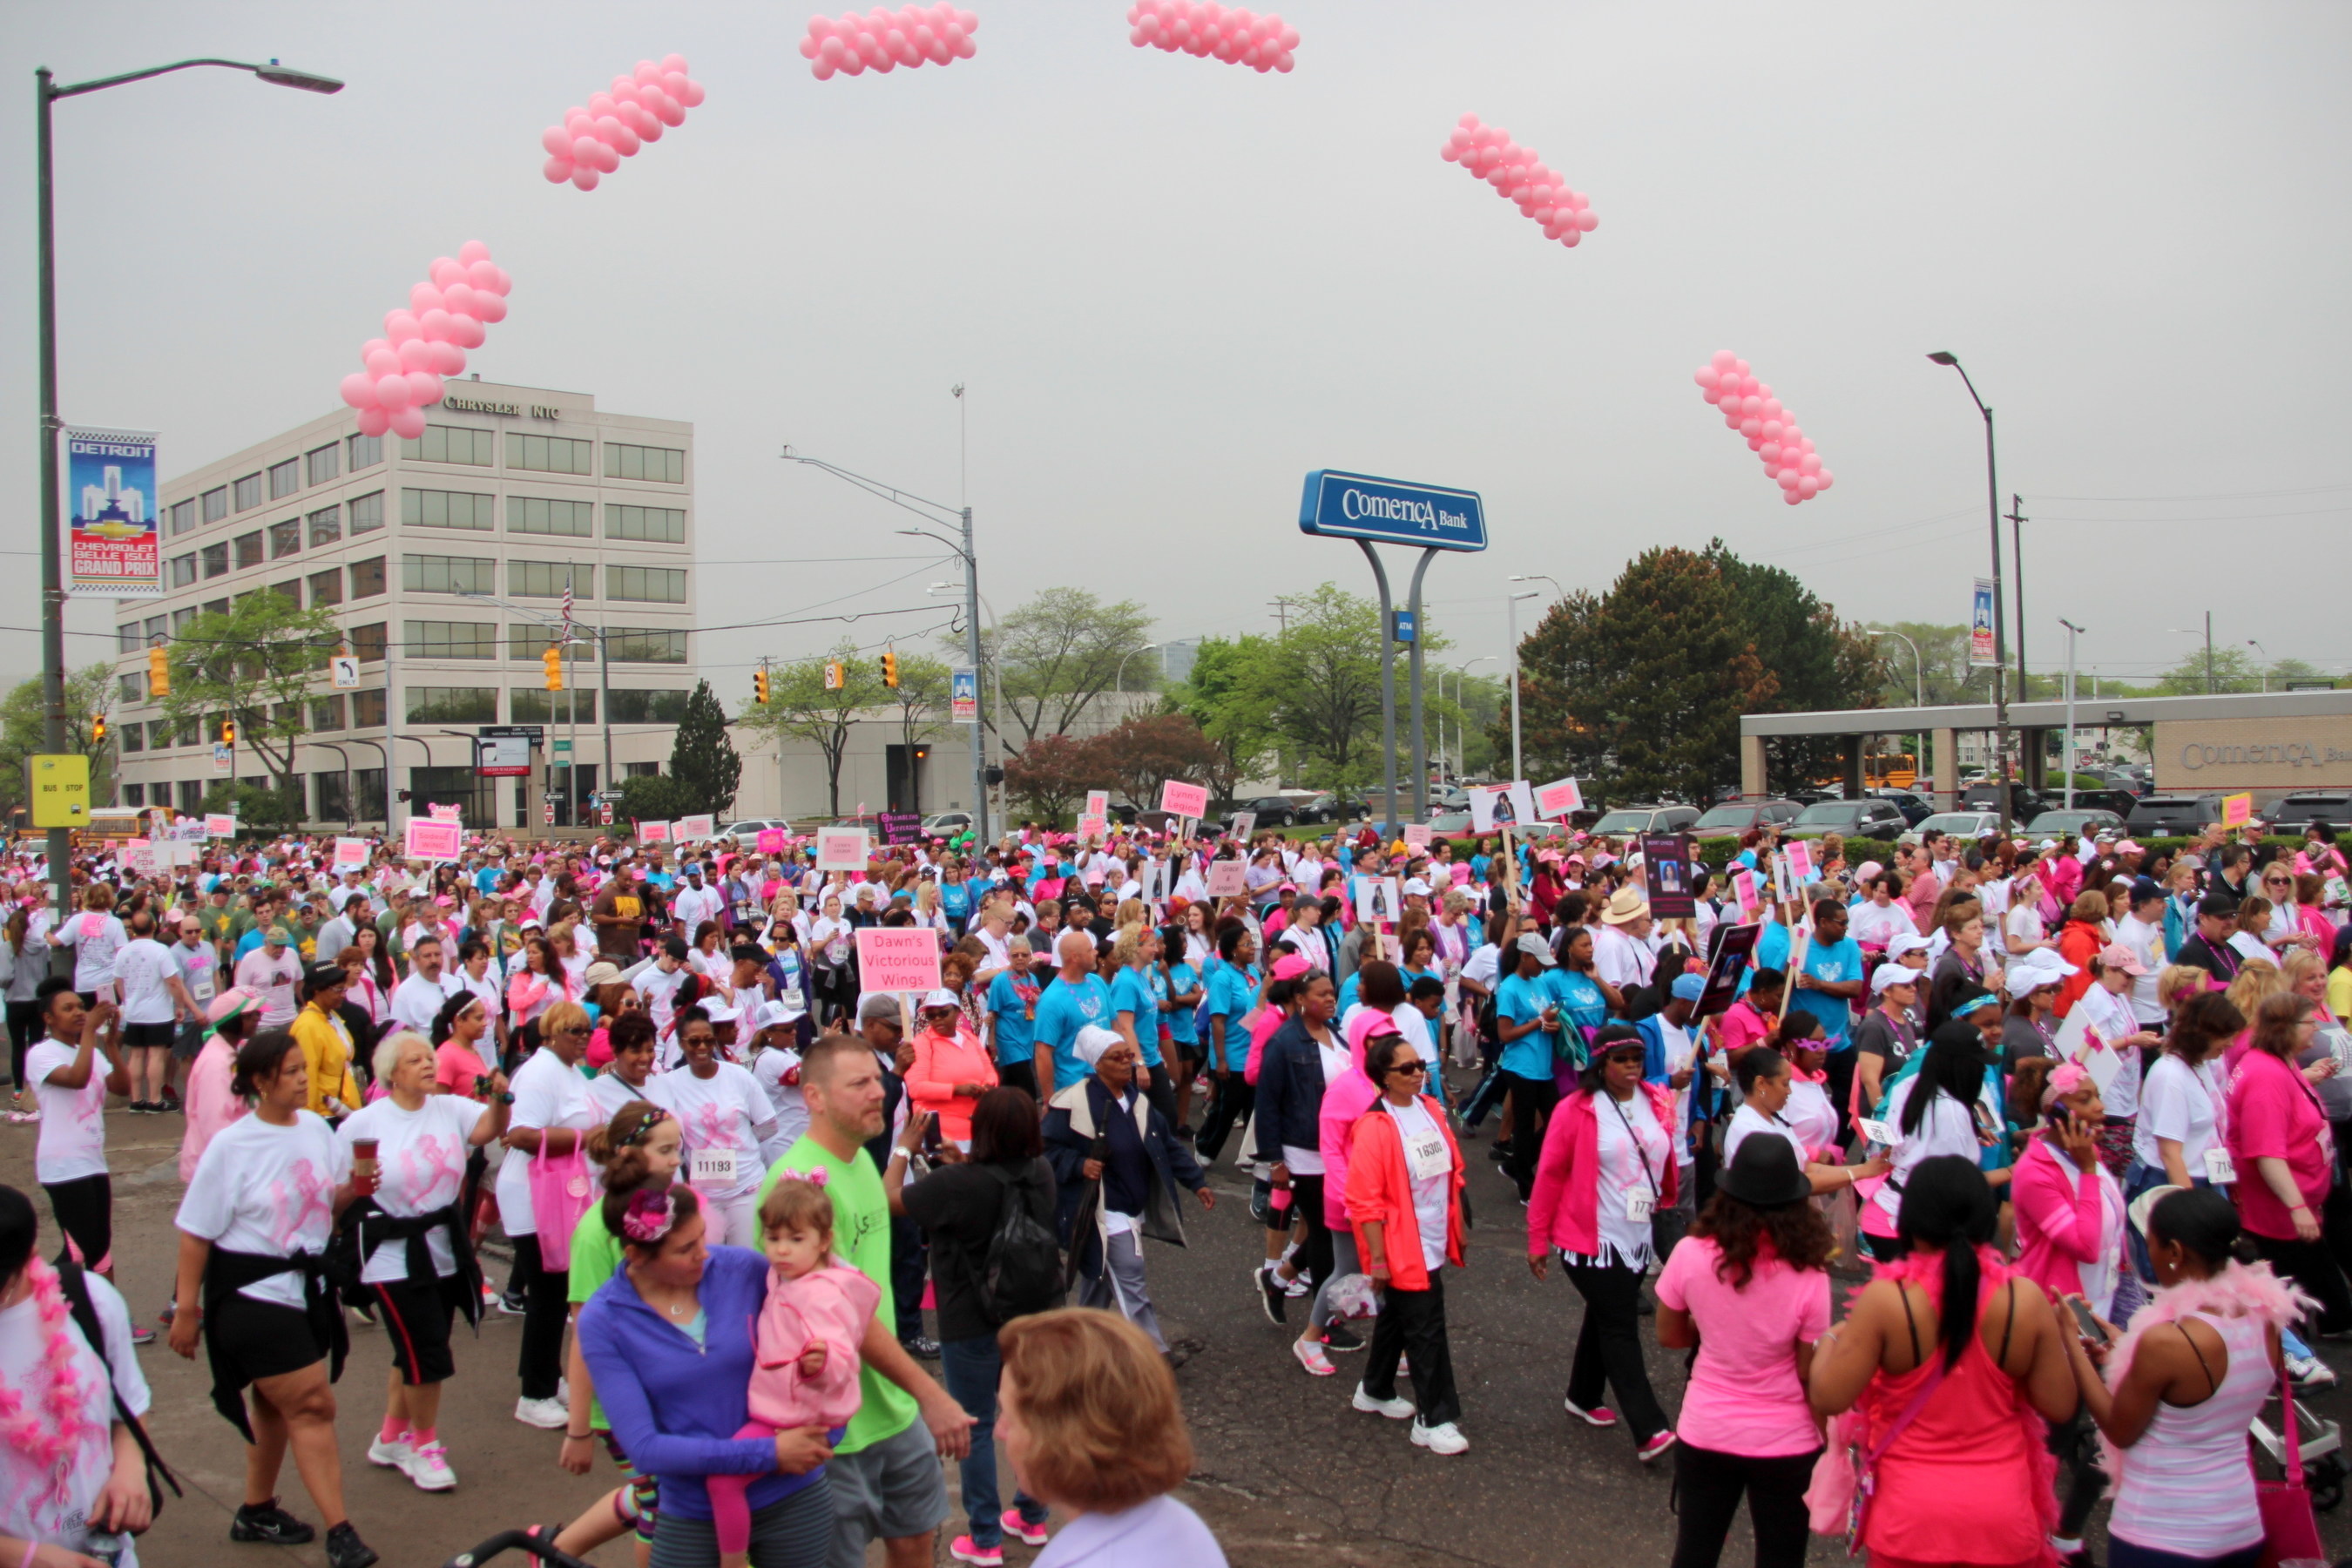 The Komen Detroit Race for the Cure, locally presented by the Karmanos Cancer Institute, announced its fundraising accomplishments from the 2015 Race held in May. Of the net proceeds of more than $1.1 million, $918,436 was awarded to four local breast cancer education, screening and treatment programs serving southeast Michigan's Wayne, Oakland and Macomb counties; and an additional $275,830 went to the Susan G. Komen for the Cure Award and Research Grant Program to support innovative breast cancer research. More than 25,000 participated in the 2015 Detroit Race. The 25th annual Komen Detroit Race will be held in spring 2016. Photo credit: Courtesy of Komen Detroit Race for the Cure